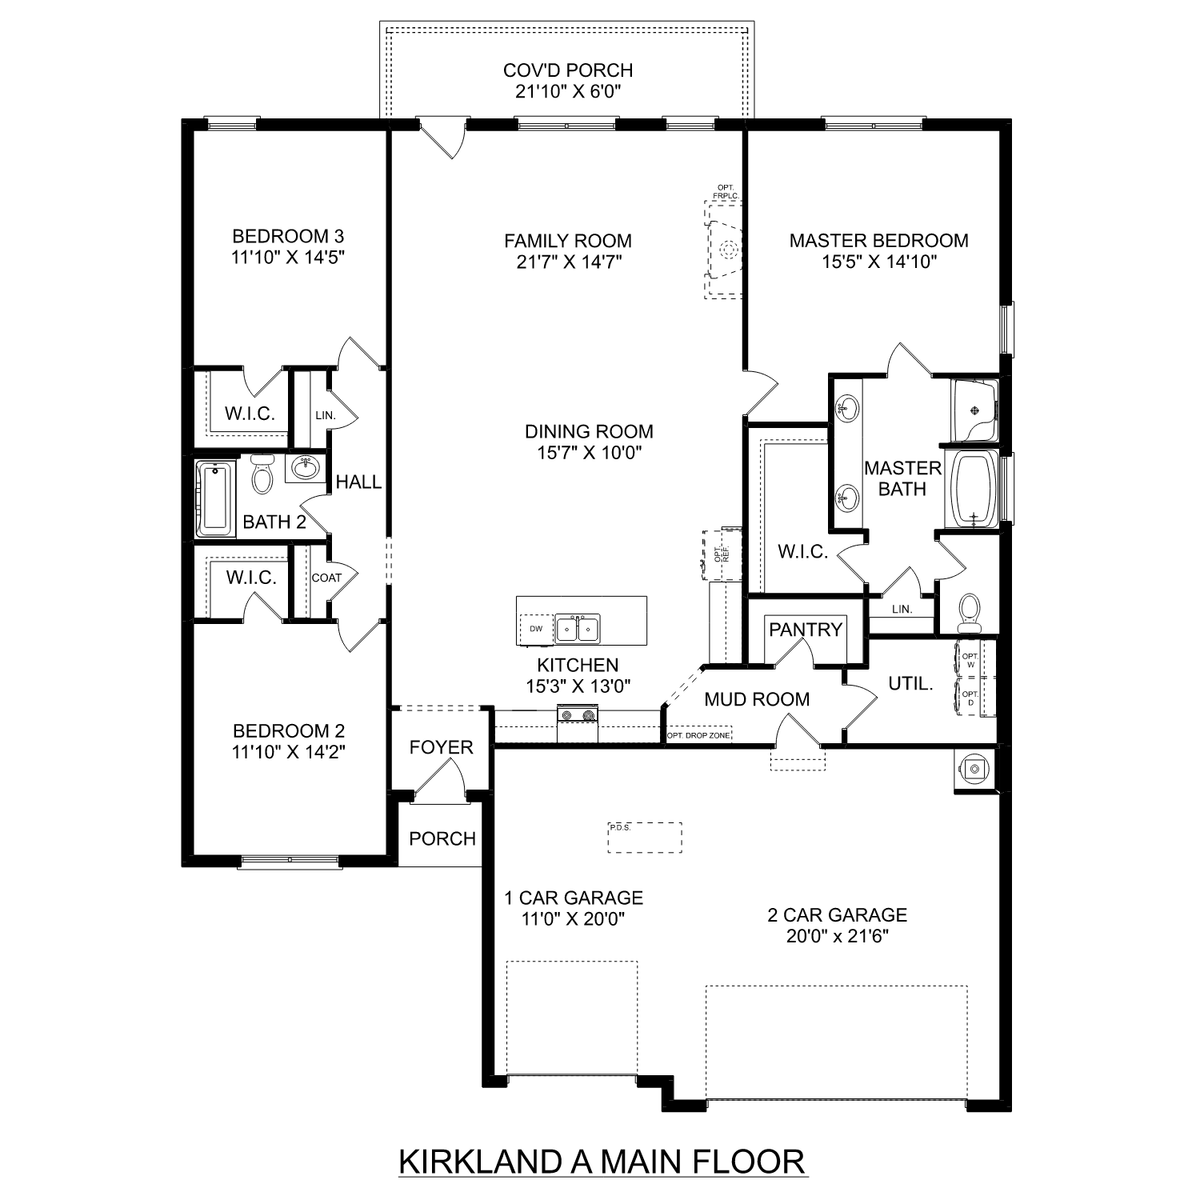 1 - The Kirkland floor plan layout for 217 White Horse Way in Davidson Homes' Kendall Downs community.